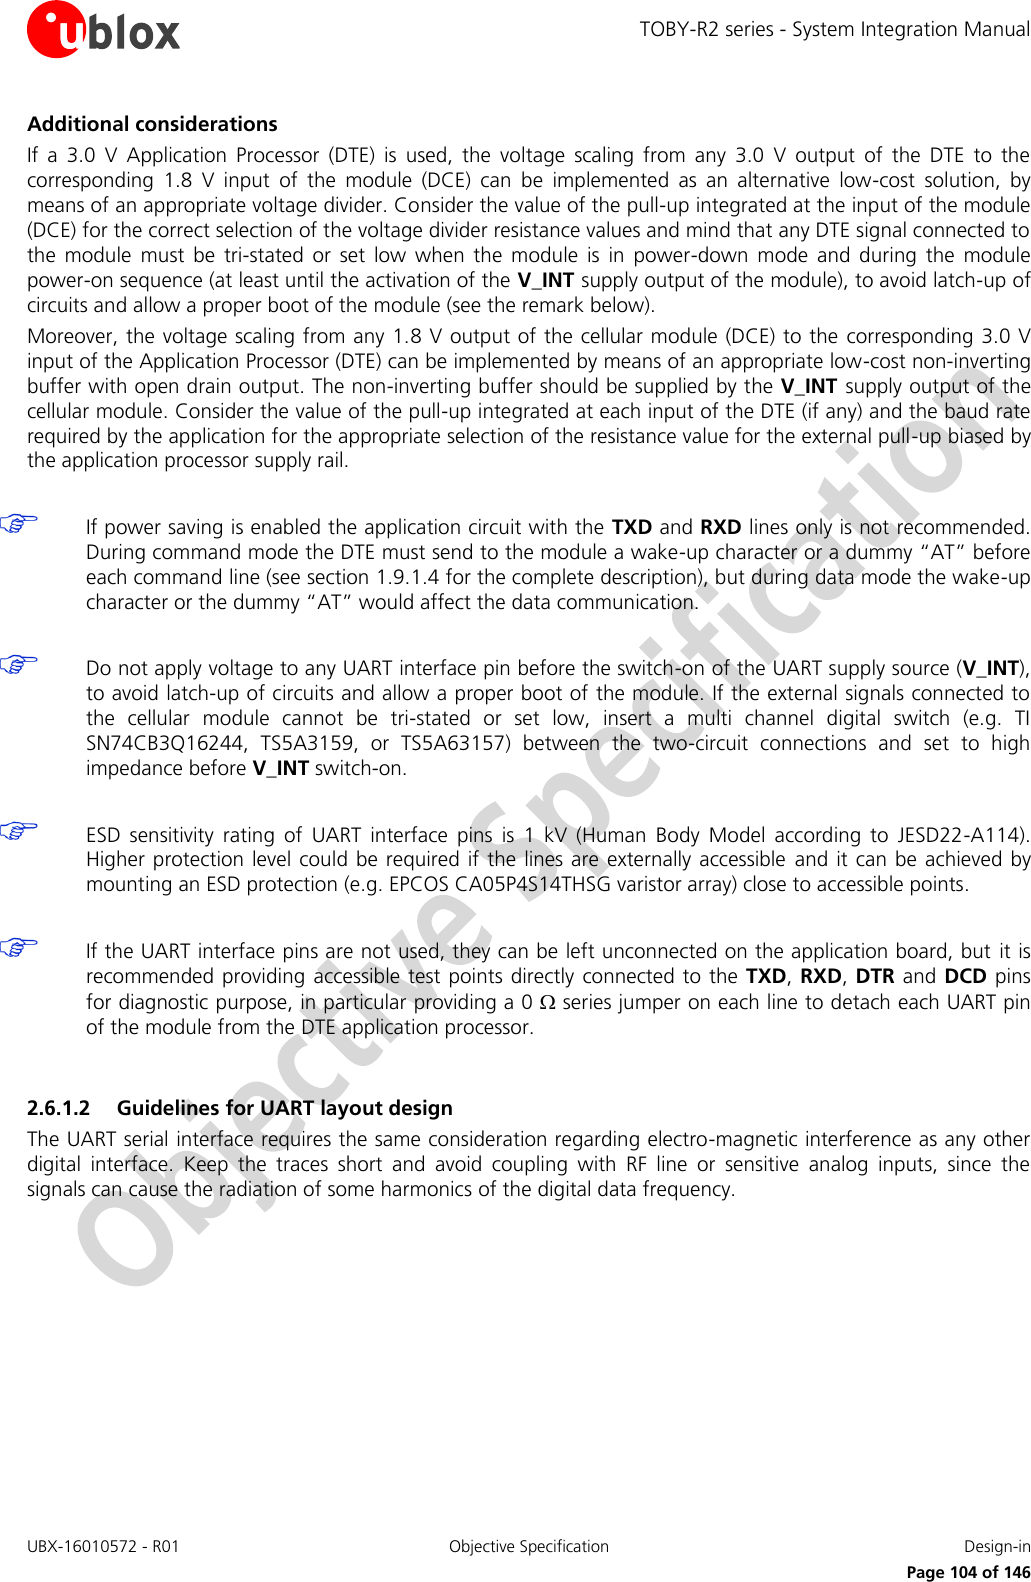 TOBY-R2 series - System Integration Manual UBX-16010572 - R01  Objective Specification  Design-in     Page 104 of 146 Additional considerations If  a  3.0  V  Application  Processor  (DTE)  is  used,  the  voltage  scaling  from  any  3.0  V  output  of  the  DTE  to  the corresponding  1.8  V  input  of  the  module  (DCE)  can  be  implemented  as  an  alternative  low-cost  solution,  by means of an appropriate voltage divider. Consider the value of the pull-up integrated at the input of the module (DCE) for the correct selection of the voltage divider resistance values and mind that any DTE signal connected to the  module  must  be  tri-stated  or  set  low  when  the  module  is  in  power-down  mode  and  during  the  module power-on sequence (at least until the activation of the V_INT supply output of the module), to avoid latch-up of circuits and allow a proper boot of the module (see the remark below).  Moreover, the voltage scaling from any 1.8 V output of the cellular module (DCE) to the  corresponding 3.0 V input of the Application Processor (DTE) can be implemented by means of an appropriate low-cost non-inverting buffer with open drain output. The non-inverting buffer should be supplied by the V_INT  supply output of the cellular module. Consider the value of the pull-up integrated at each input of the DTE (if any) and the baud rate required by the application for the appropriate selection of the resistance value for the external pull-up biased by the application processor supply rail.   If power saving is enabled the application circuit with the TXD and RXD lines only is not recommended. During command mode the DTE must send to the module a wake-up character or a dummy “AT” before each command line (see section 1.9.1.4 for the complete description), but during data mode the wake-up character or the dummy “AT” would affect the data communication.   Do not apply voltage to any UART interface pin before the switch-on of the UART supply source (V_INT), to avoid latch-up of circuits and allow a proper boot of the module. If the external signals connected to the  cellular  module  cannot  be  tri-stated  or  set  low,  insert  a  multi  channel  digital  switch  (e.g.  TI SN74CB3Q16244,  TS5A3159,  or  TS5A63157)  between  the  two-circuit  connections  and  set  to  high impedance before V_INT switch-on.   ESD  sensitivity  rating  of  UART  interface  pins  is  1  kV  (Human  Body  Model  according  to  JESD22-A114). Higher protection level could  be  required if the lines are externally accessible  and  it  can be achieved  by mounting an ESD protection (e.g. EPCOS CA05P4S14THSG varistor array) close to accessible points.   If the UART interface pins are not used, they can be left unconnected on the application board, but  it is recommended providing  accessible test points directly connected to the  TXD, RXD, DTR and DCD pins for diagnostic purpose, in particular providing a 0  series jumper on each line to detach each UART pin of the module from the DTE application processor.  2.6.1.2 Guidelines for UART layout design The UART serial interface requires the same consideration regarding electro-magnetic interference as any other digital  interface.  Keep  the  traces  short  and  avoid  coupling  with  RF  line  or  sensitive  analog  inputs,  since  the signals can cause the radiation of some harmonics of the digital data frequency.  